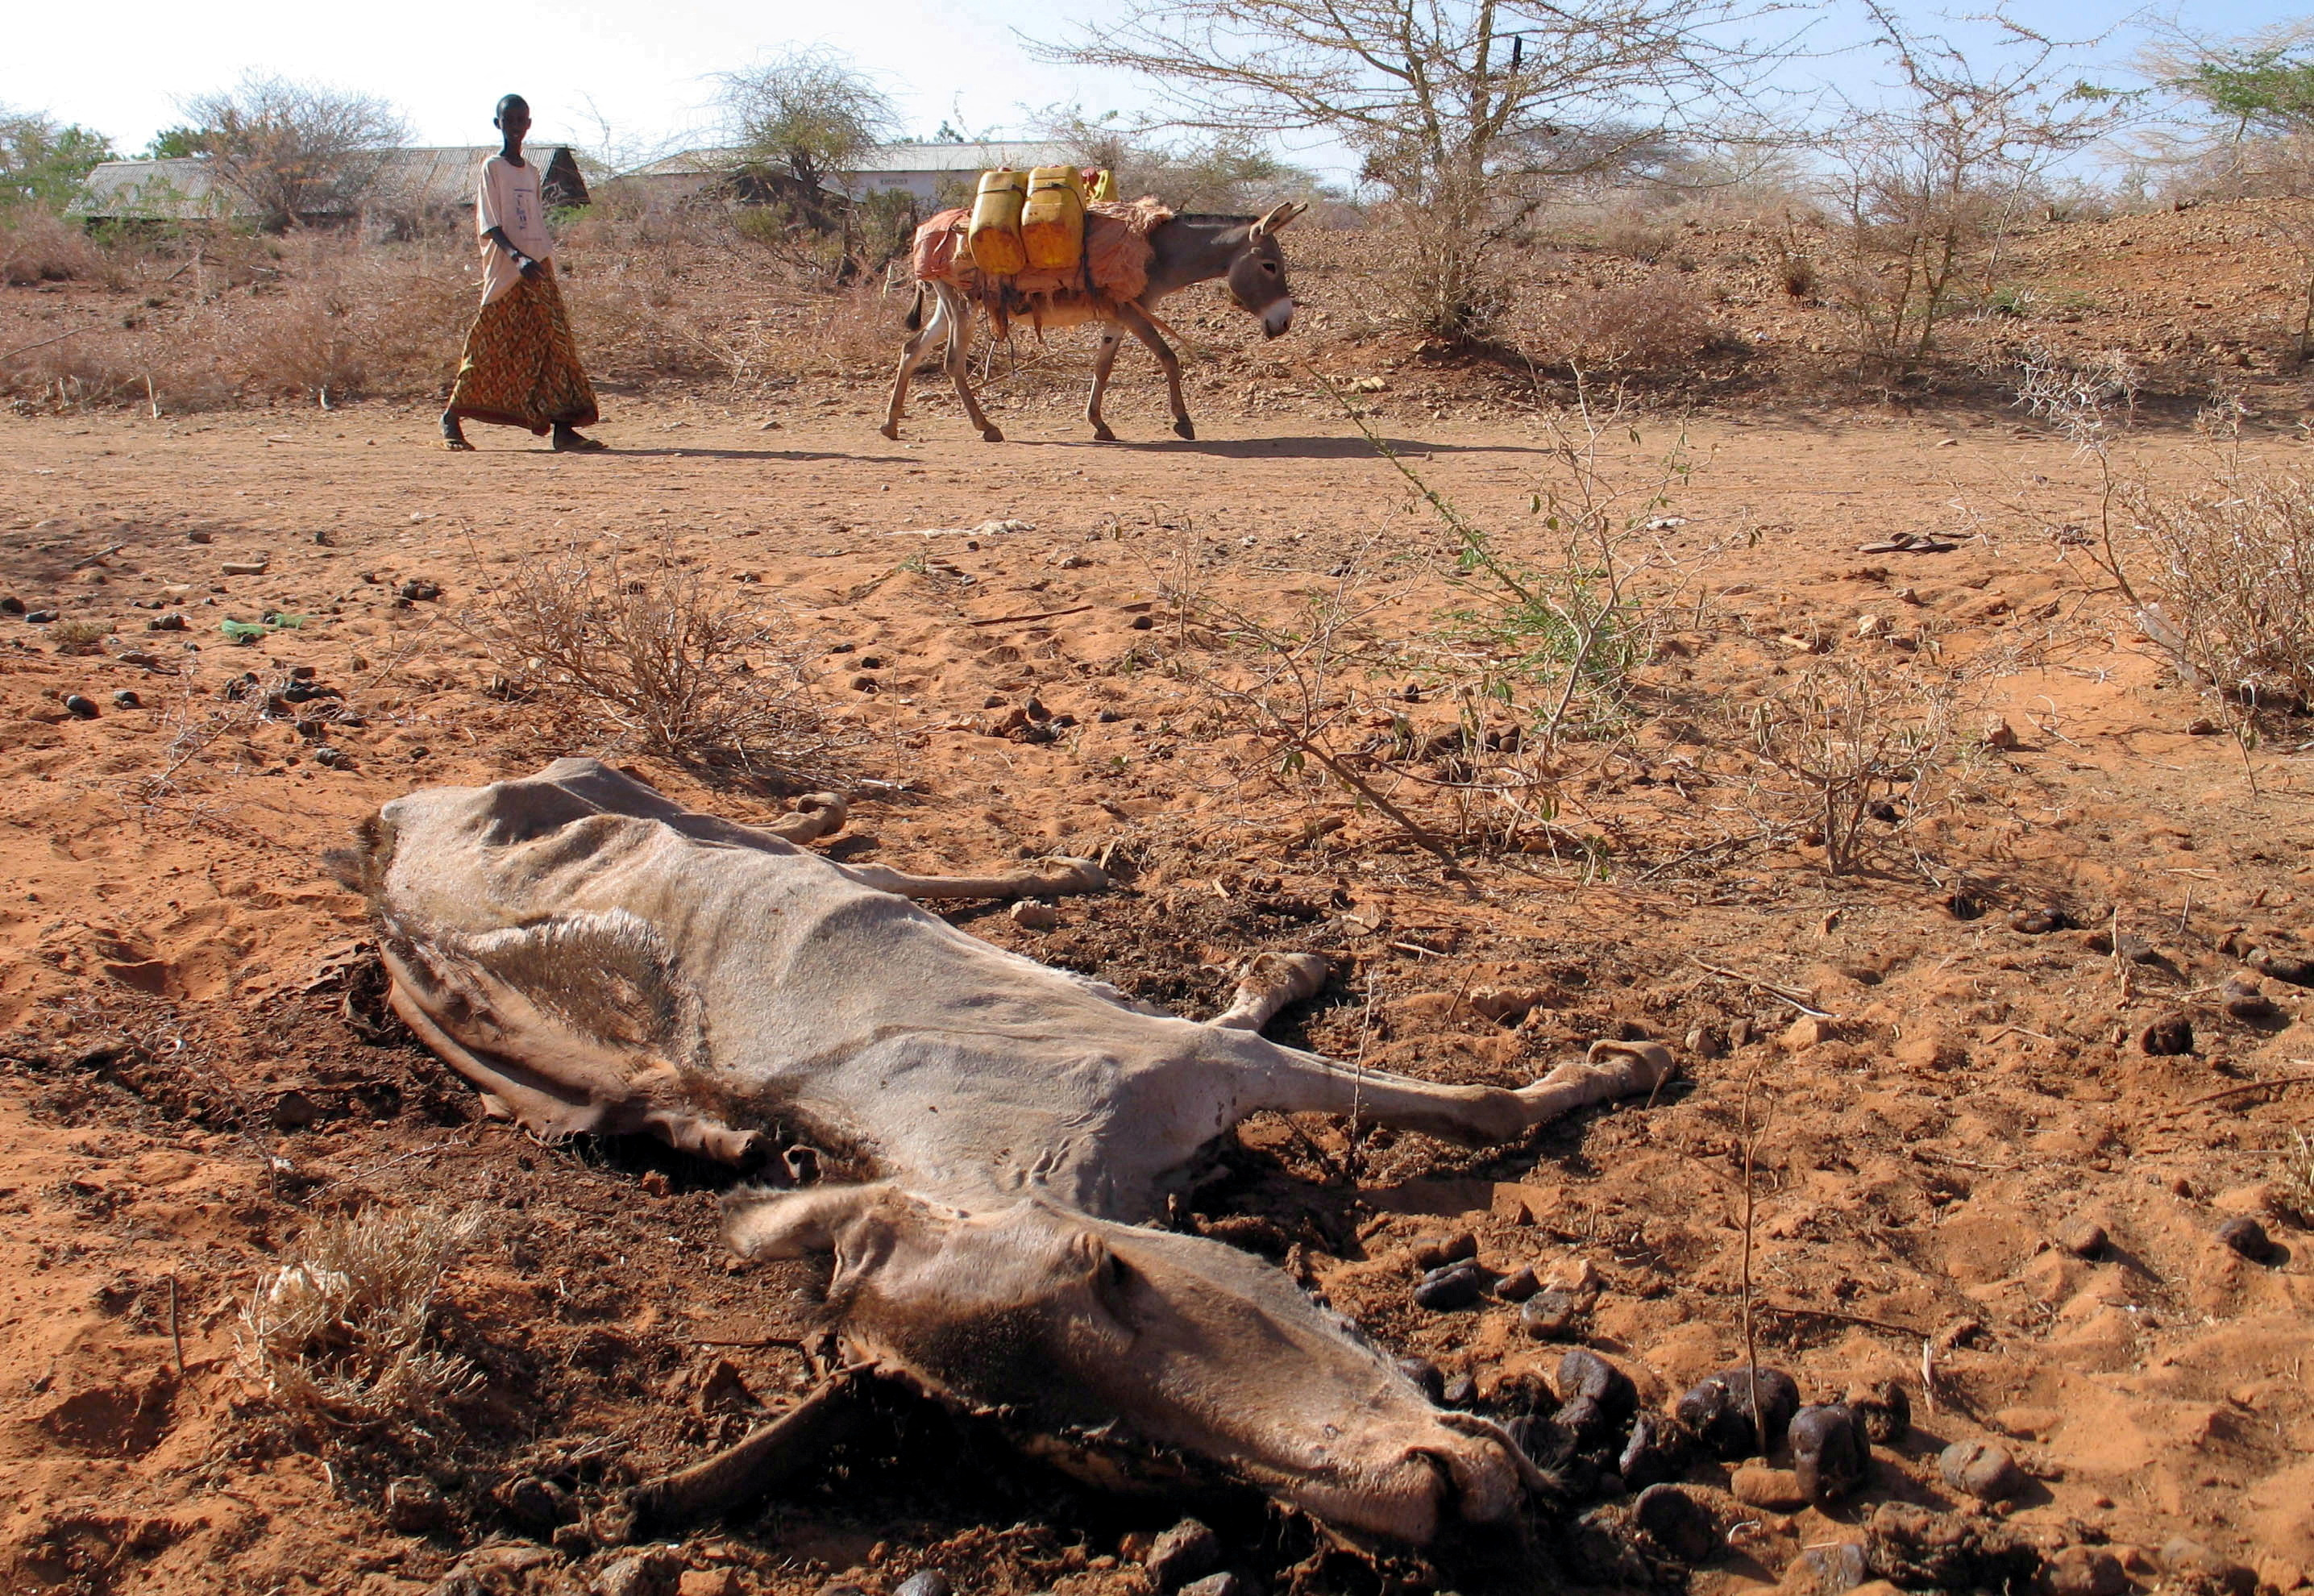 A Somali herdsman walks with his donkey past a carcass in Garbaharey